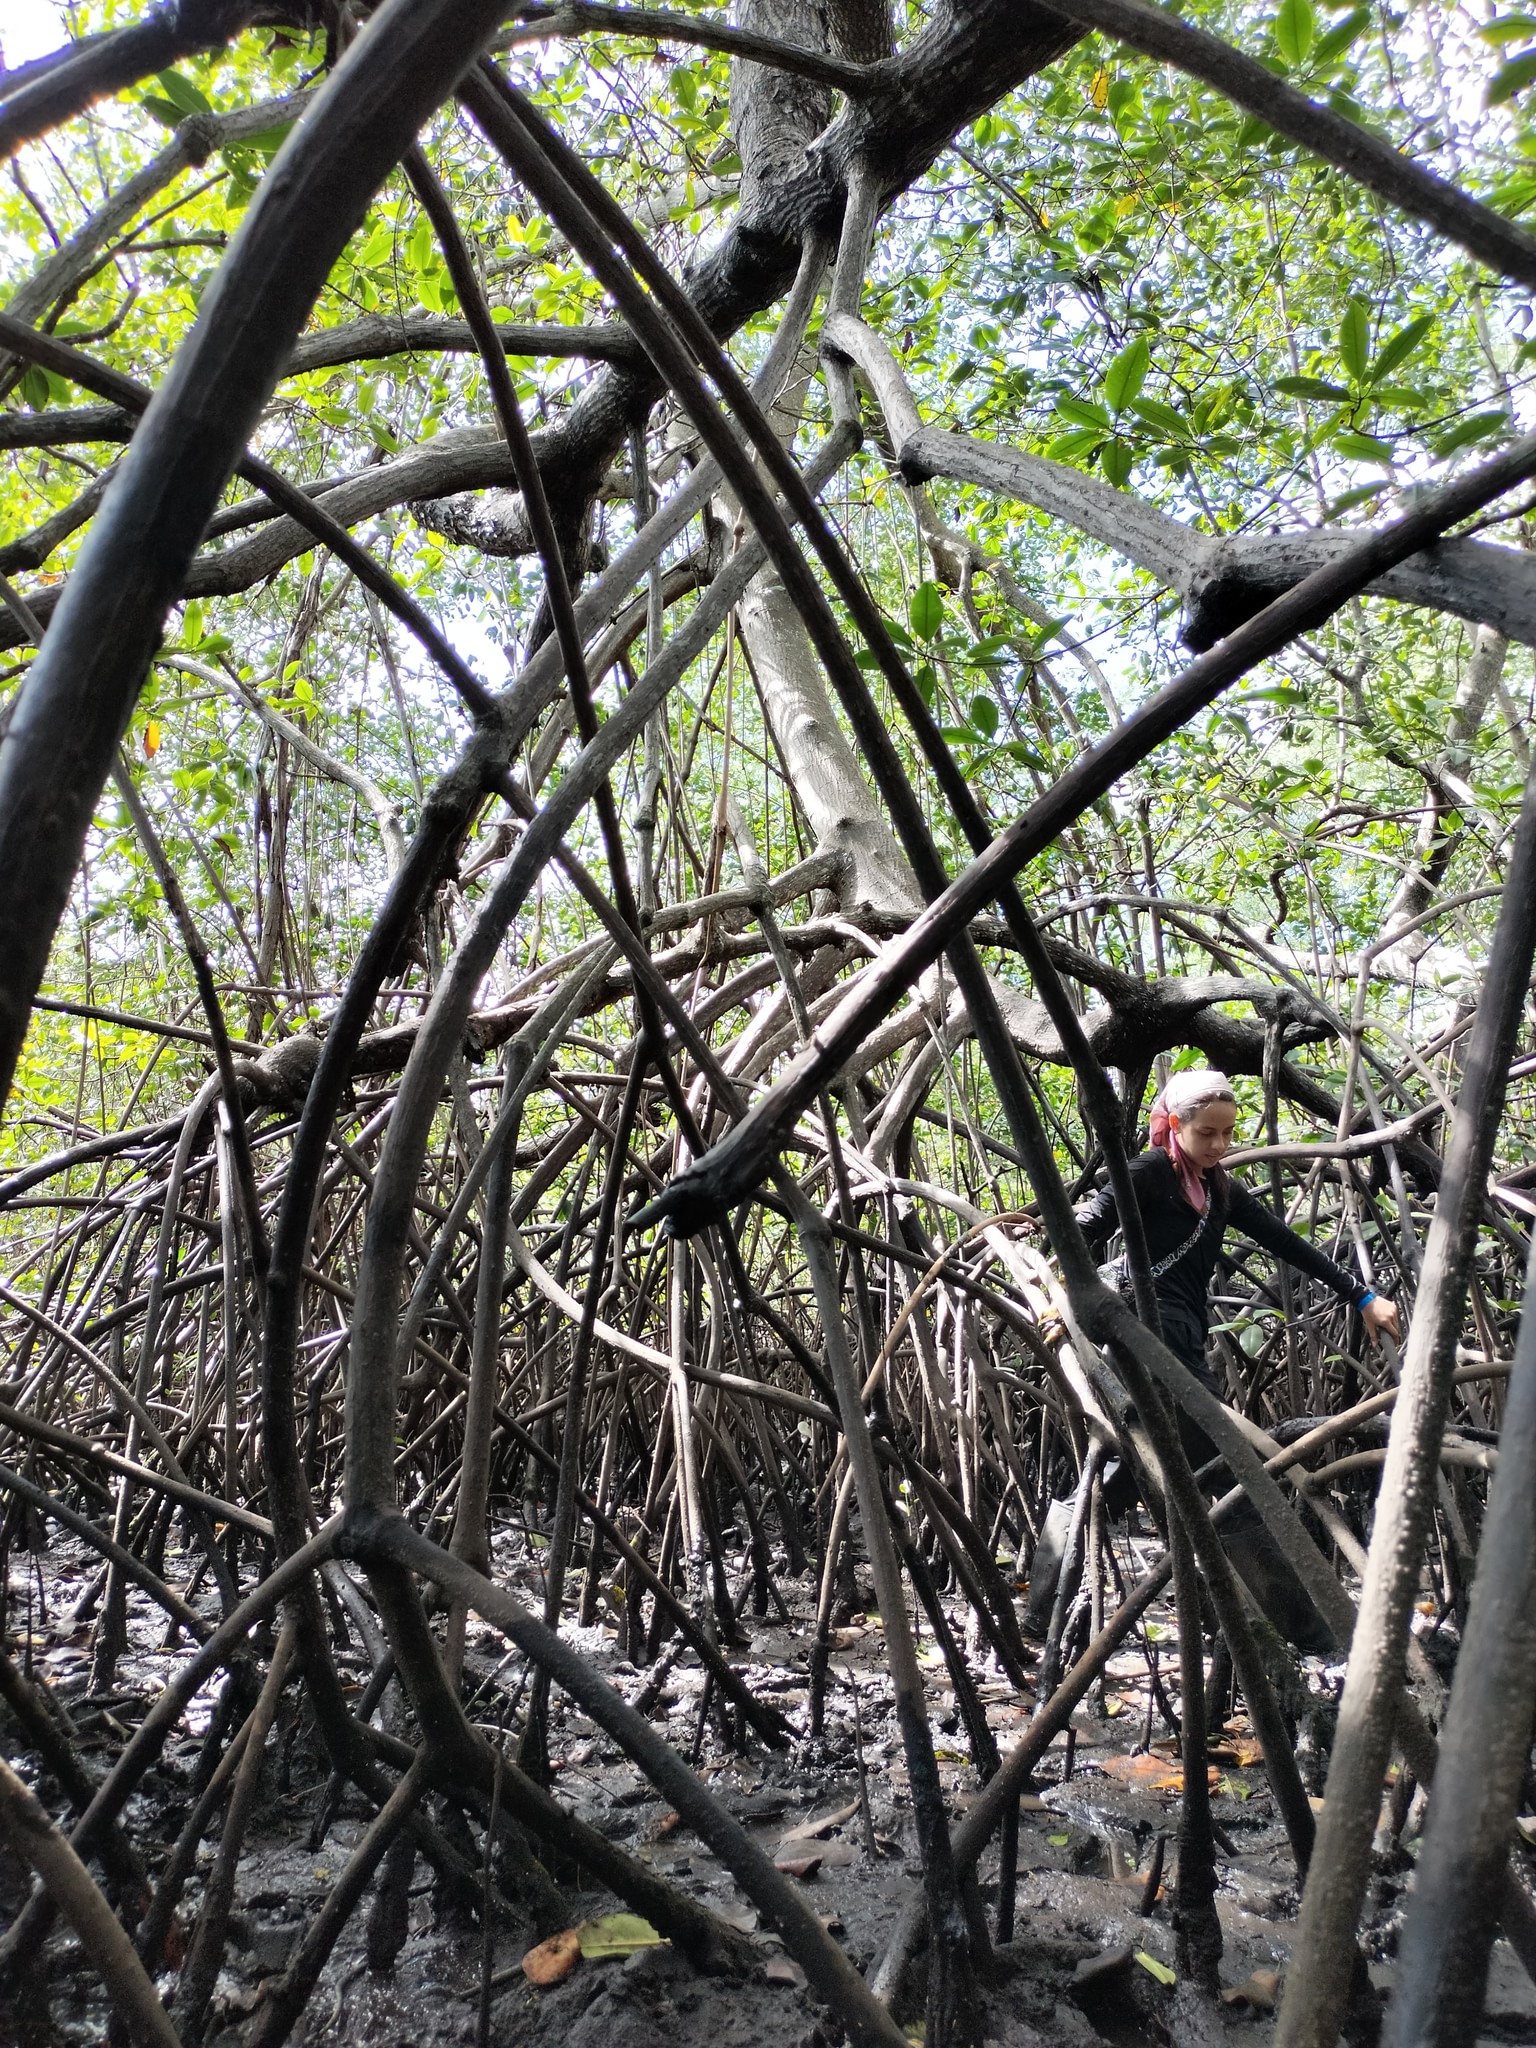 Day 4 - Mangrove and Piangua Route